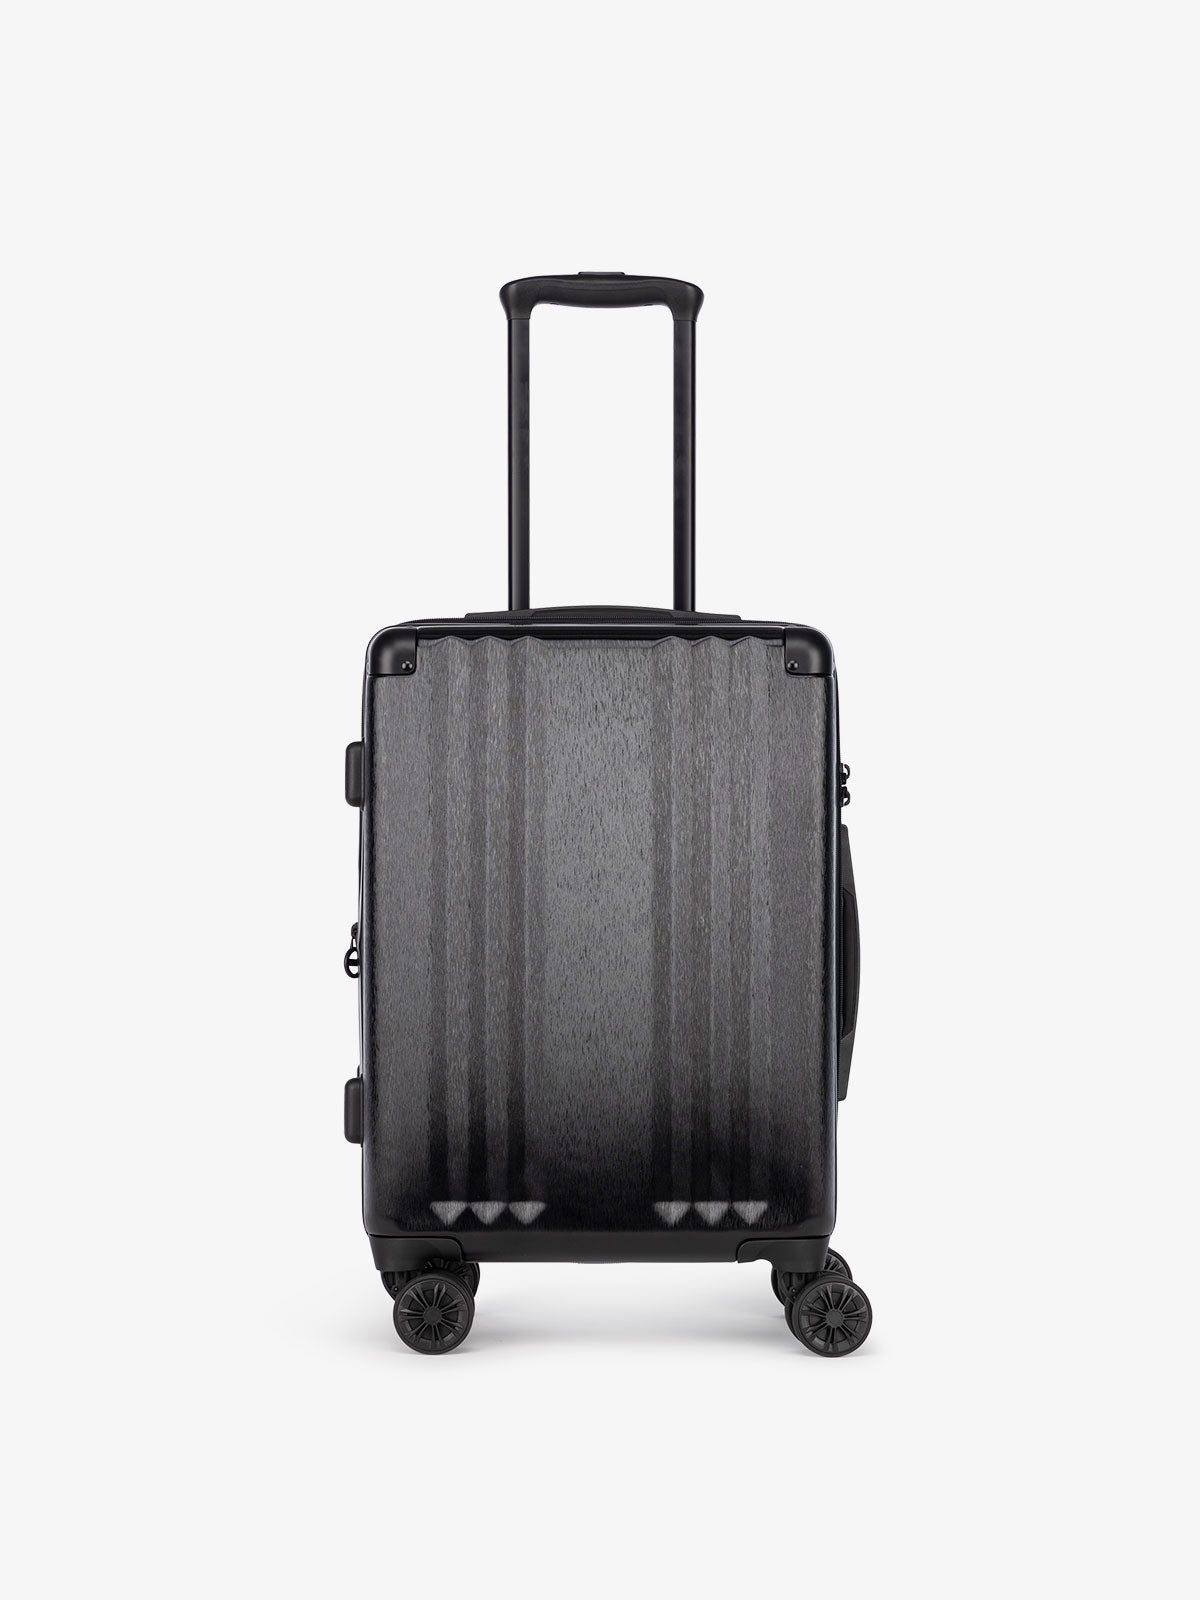 CALPAK Ambeur: 2 piece lightweight rolling spinner carry on luggage part of matching luggage set